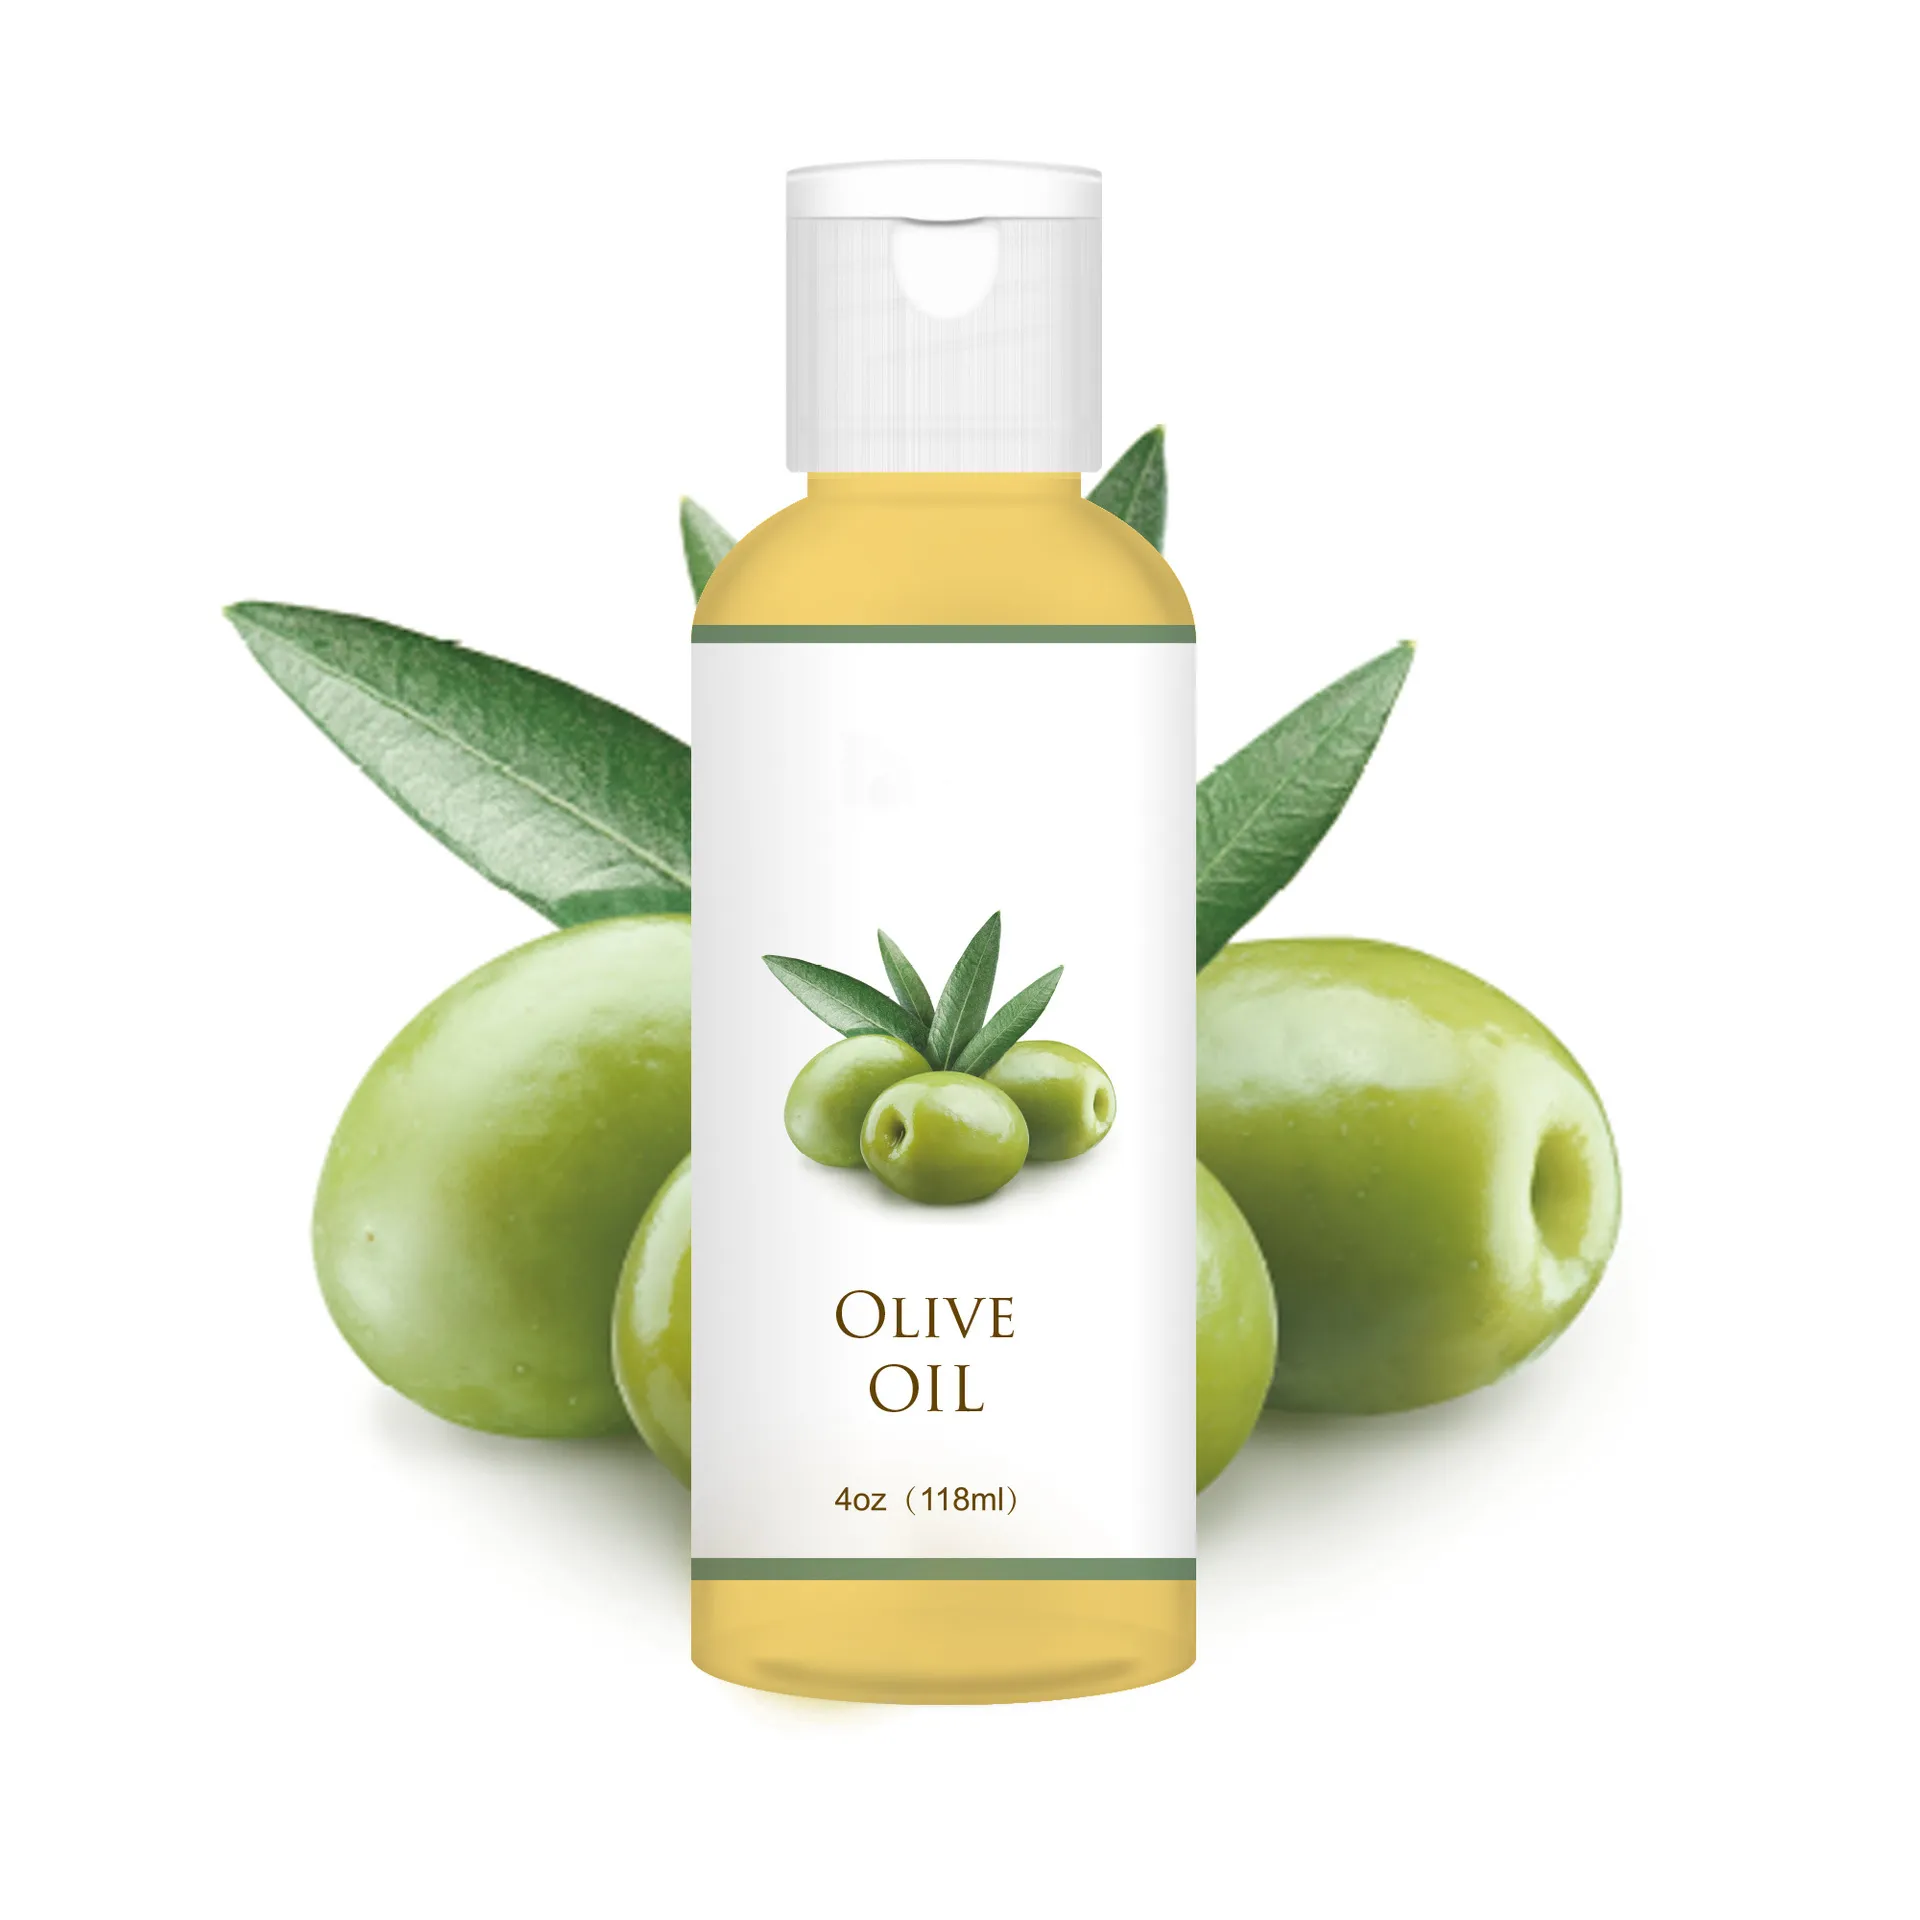 Cold pressing, initial pressing, fractional distillation of olive oil, plant extract base oil, spot instant production